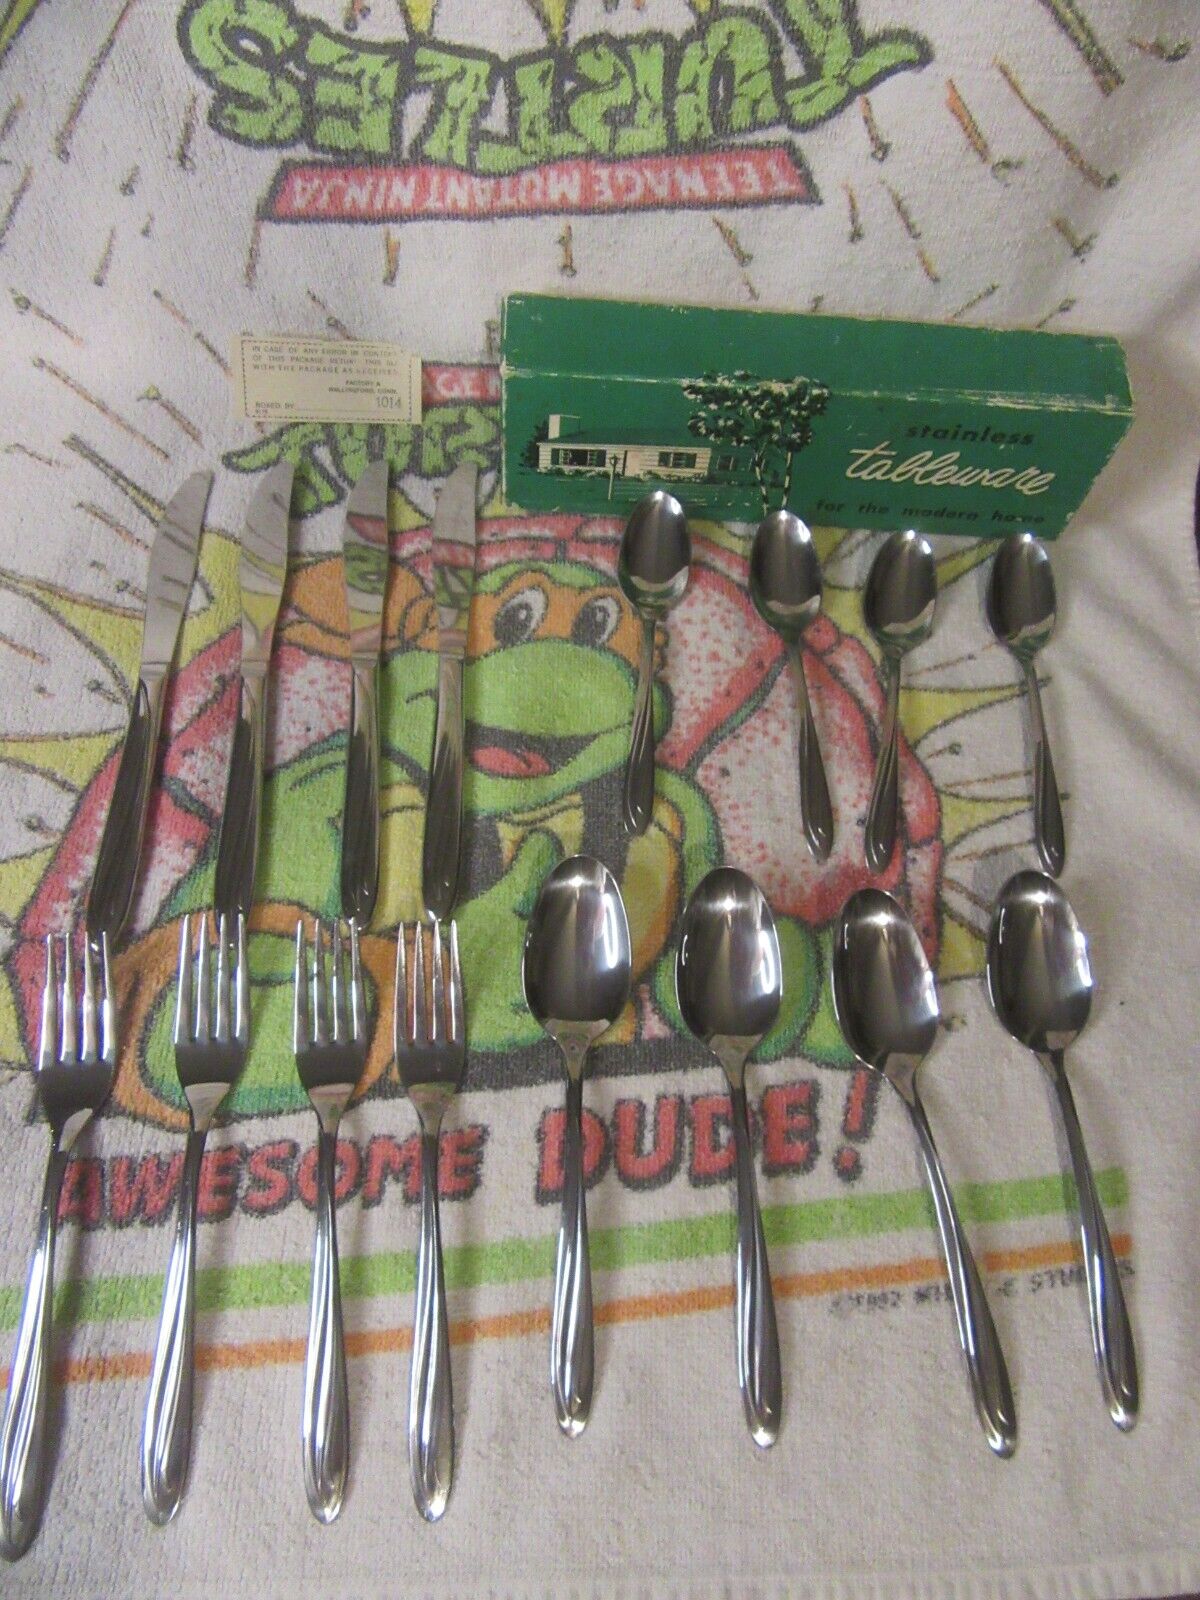 Superior Stainless Set/Lot of 16 Silverware